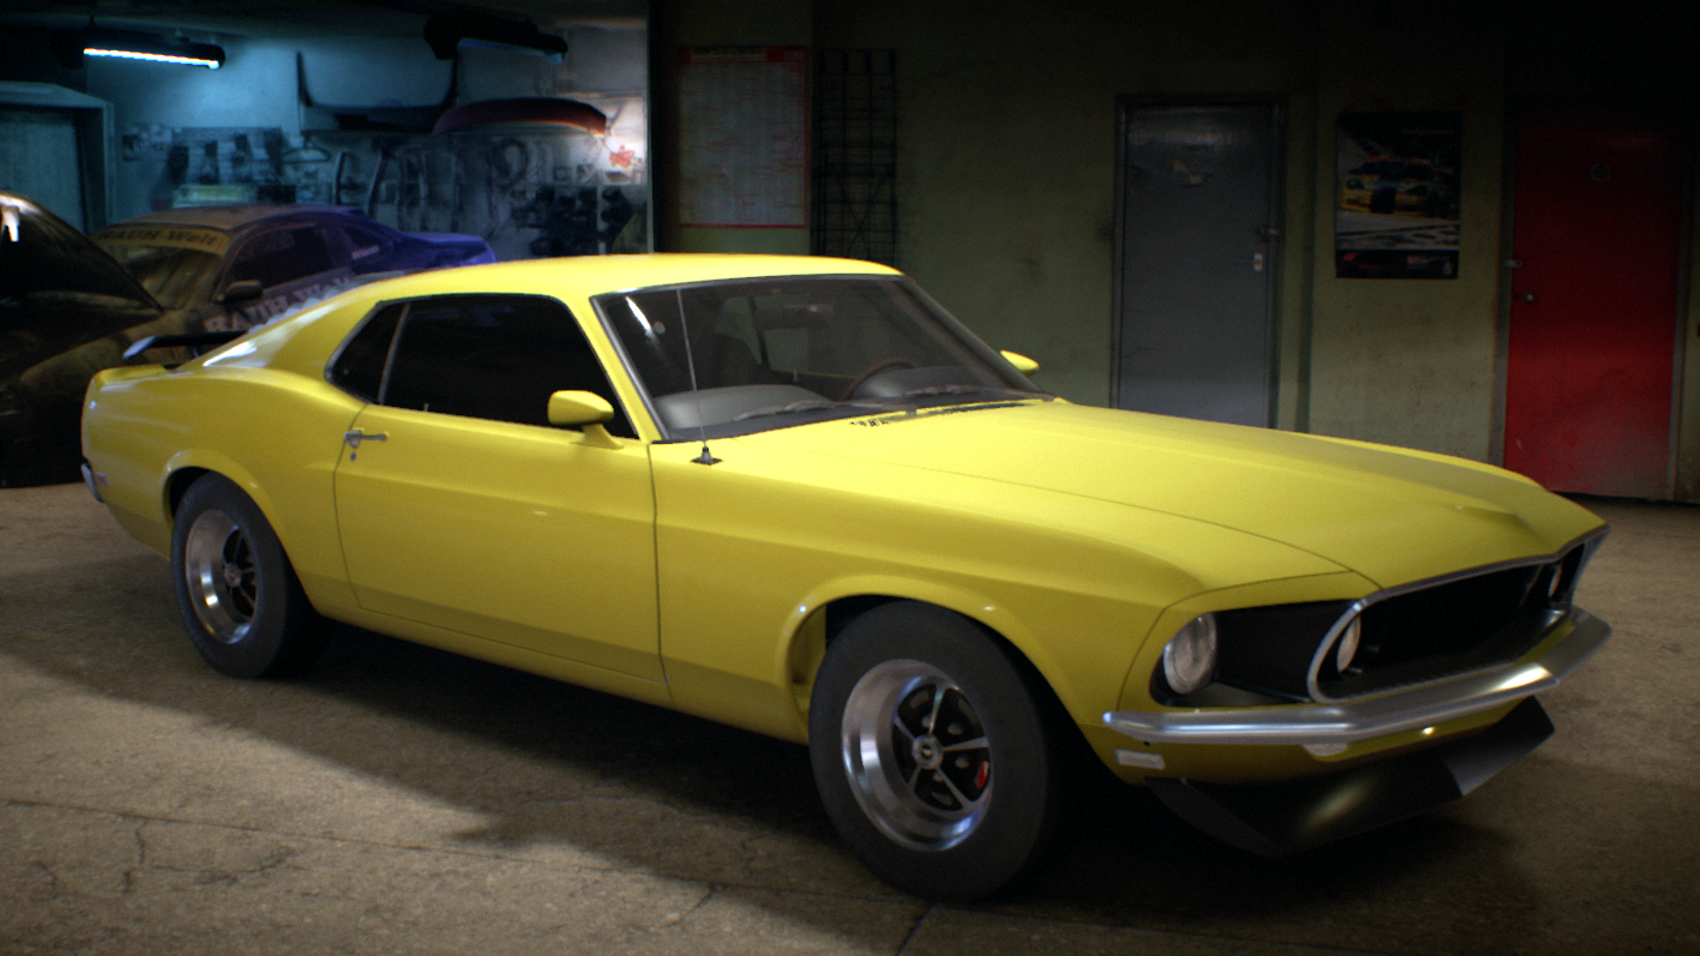 Ford Mustang Boss 302 (1969) | Need for Speed Wiki ...